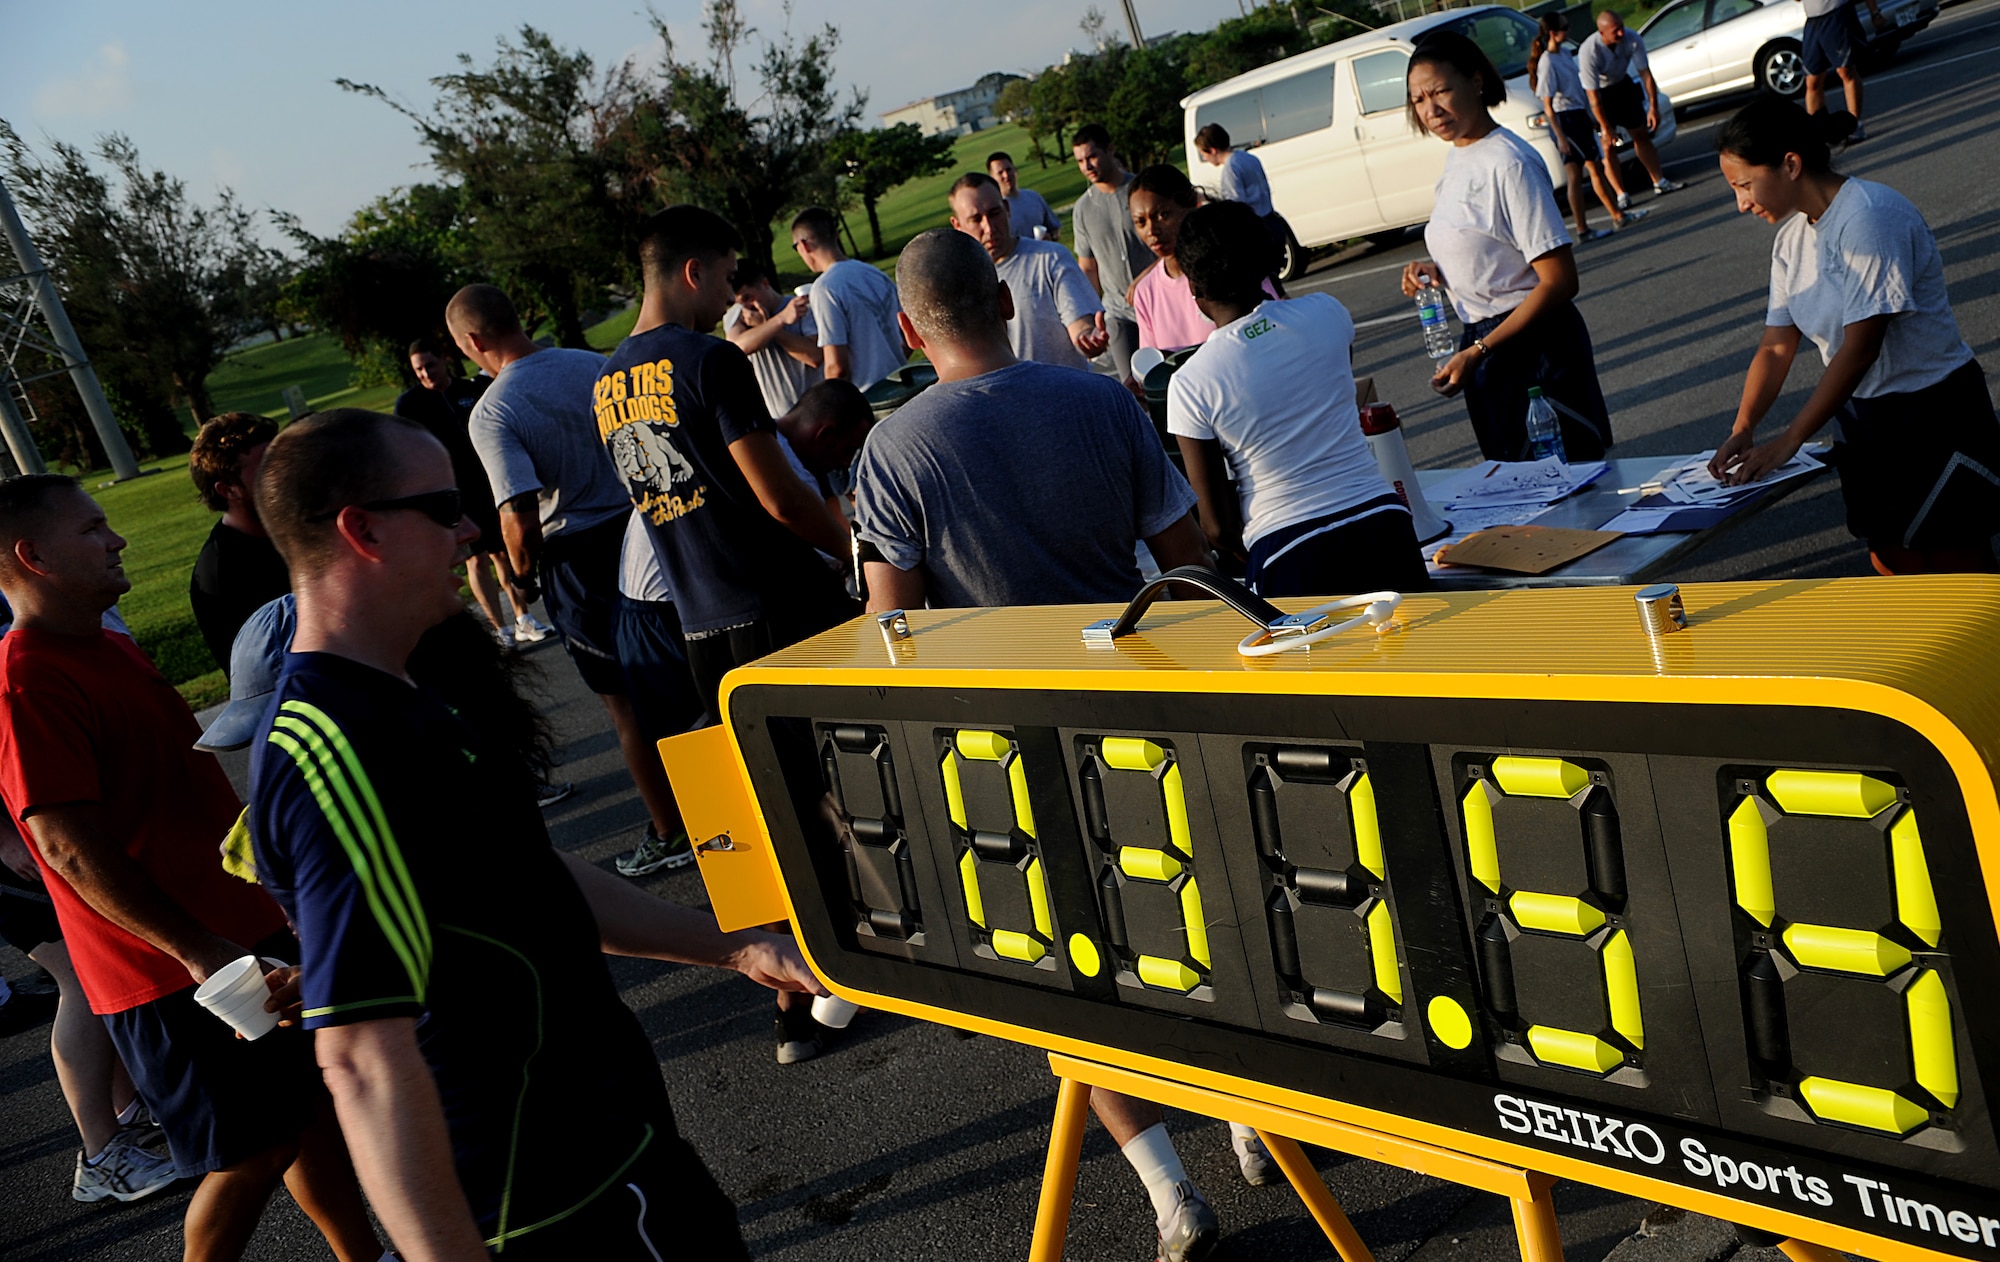 Participants of the 5k fun run designed to aid flood victims from Minot Air Force Base, N.D., gather at the finish line to hear the fundraising results. More than 130 Shogun Warriors raised $2,000 during the event. (U.S. Air Force photo/Staff Sgt. Christopher Hummel)